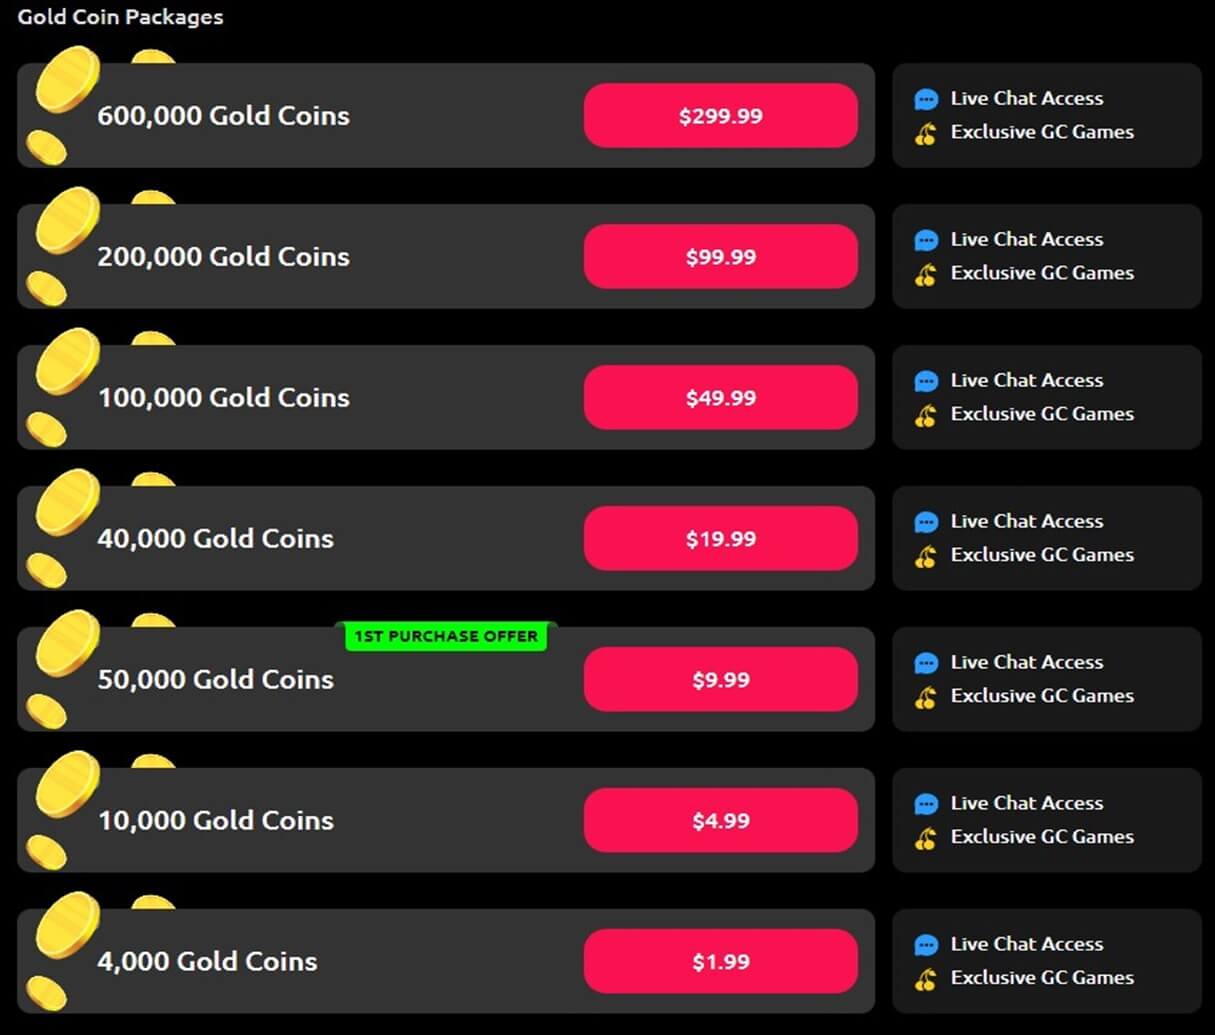 McLuck Gold Coins Packages